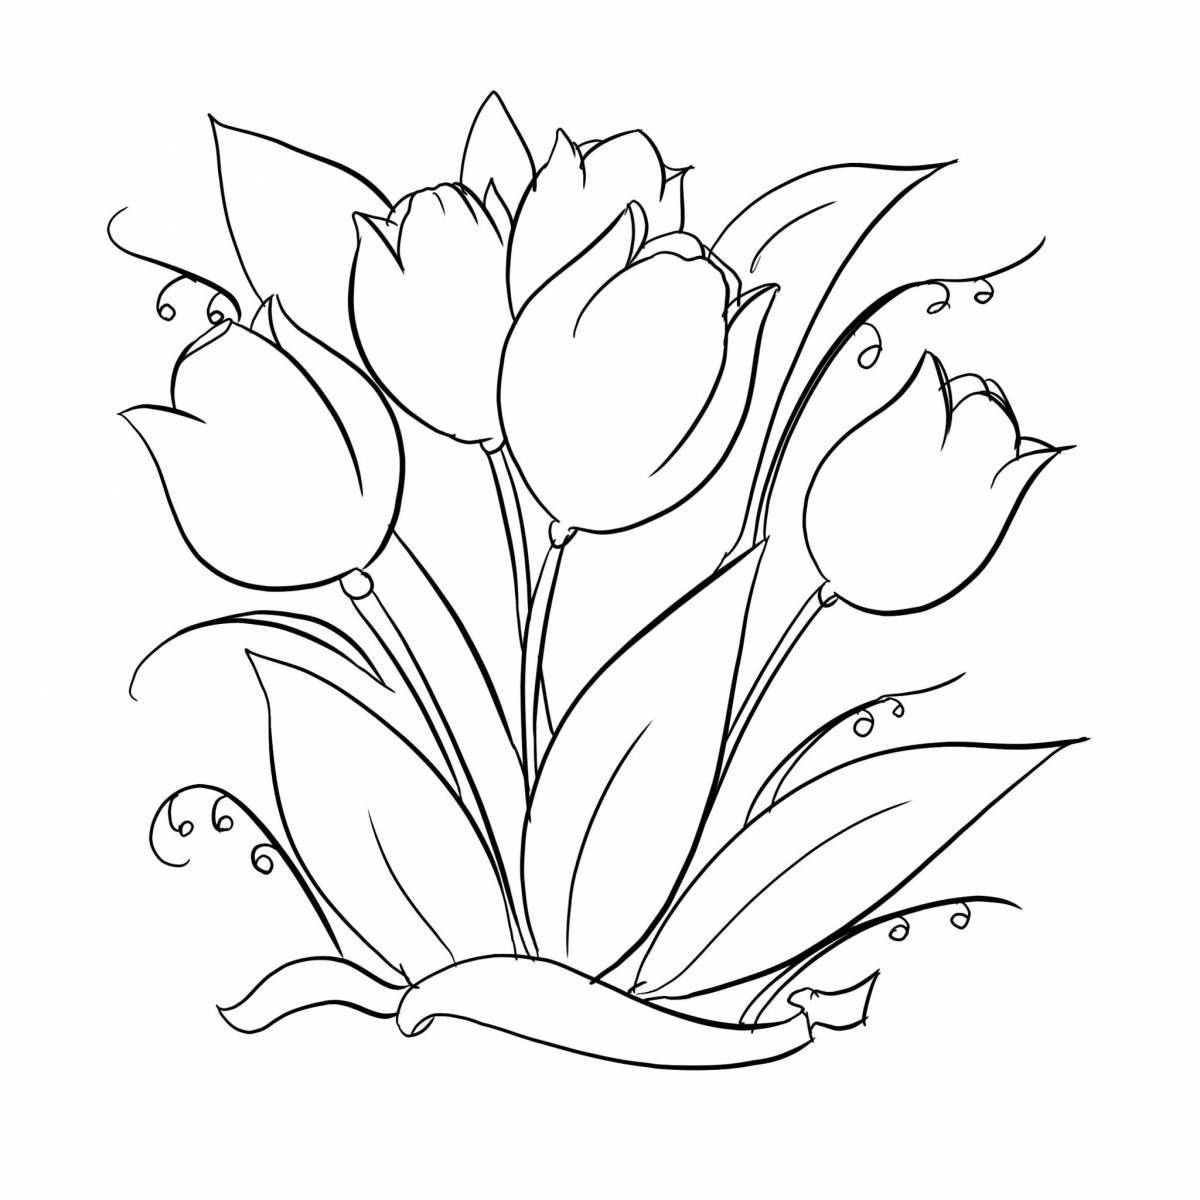 Coloring book exotic tulips for March 8